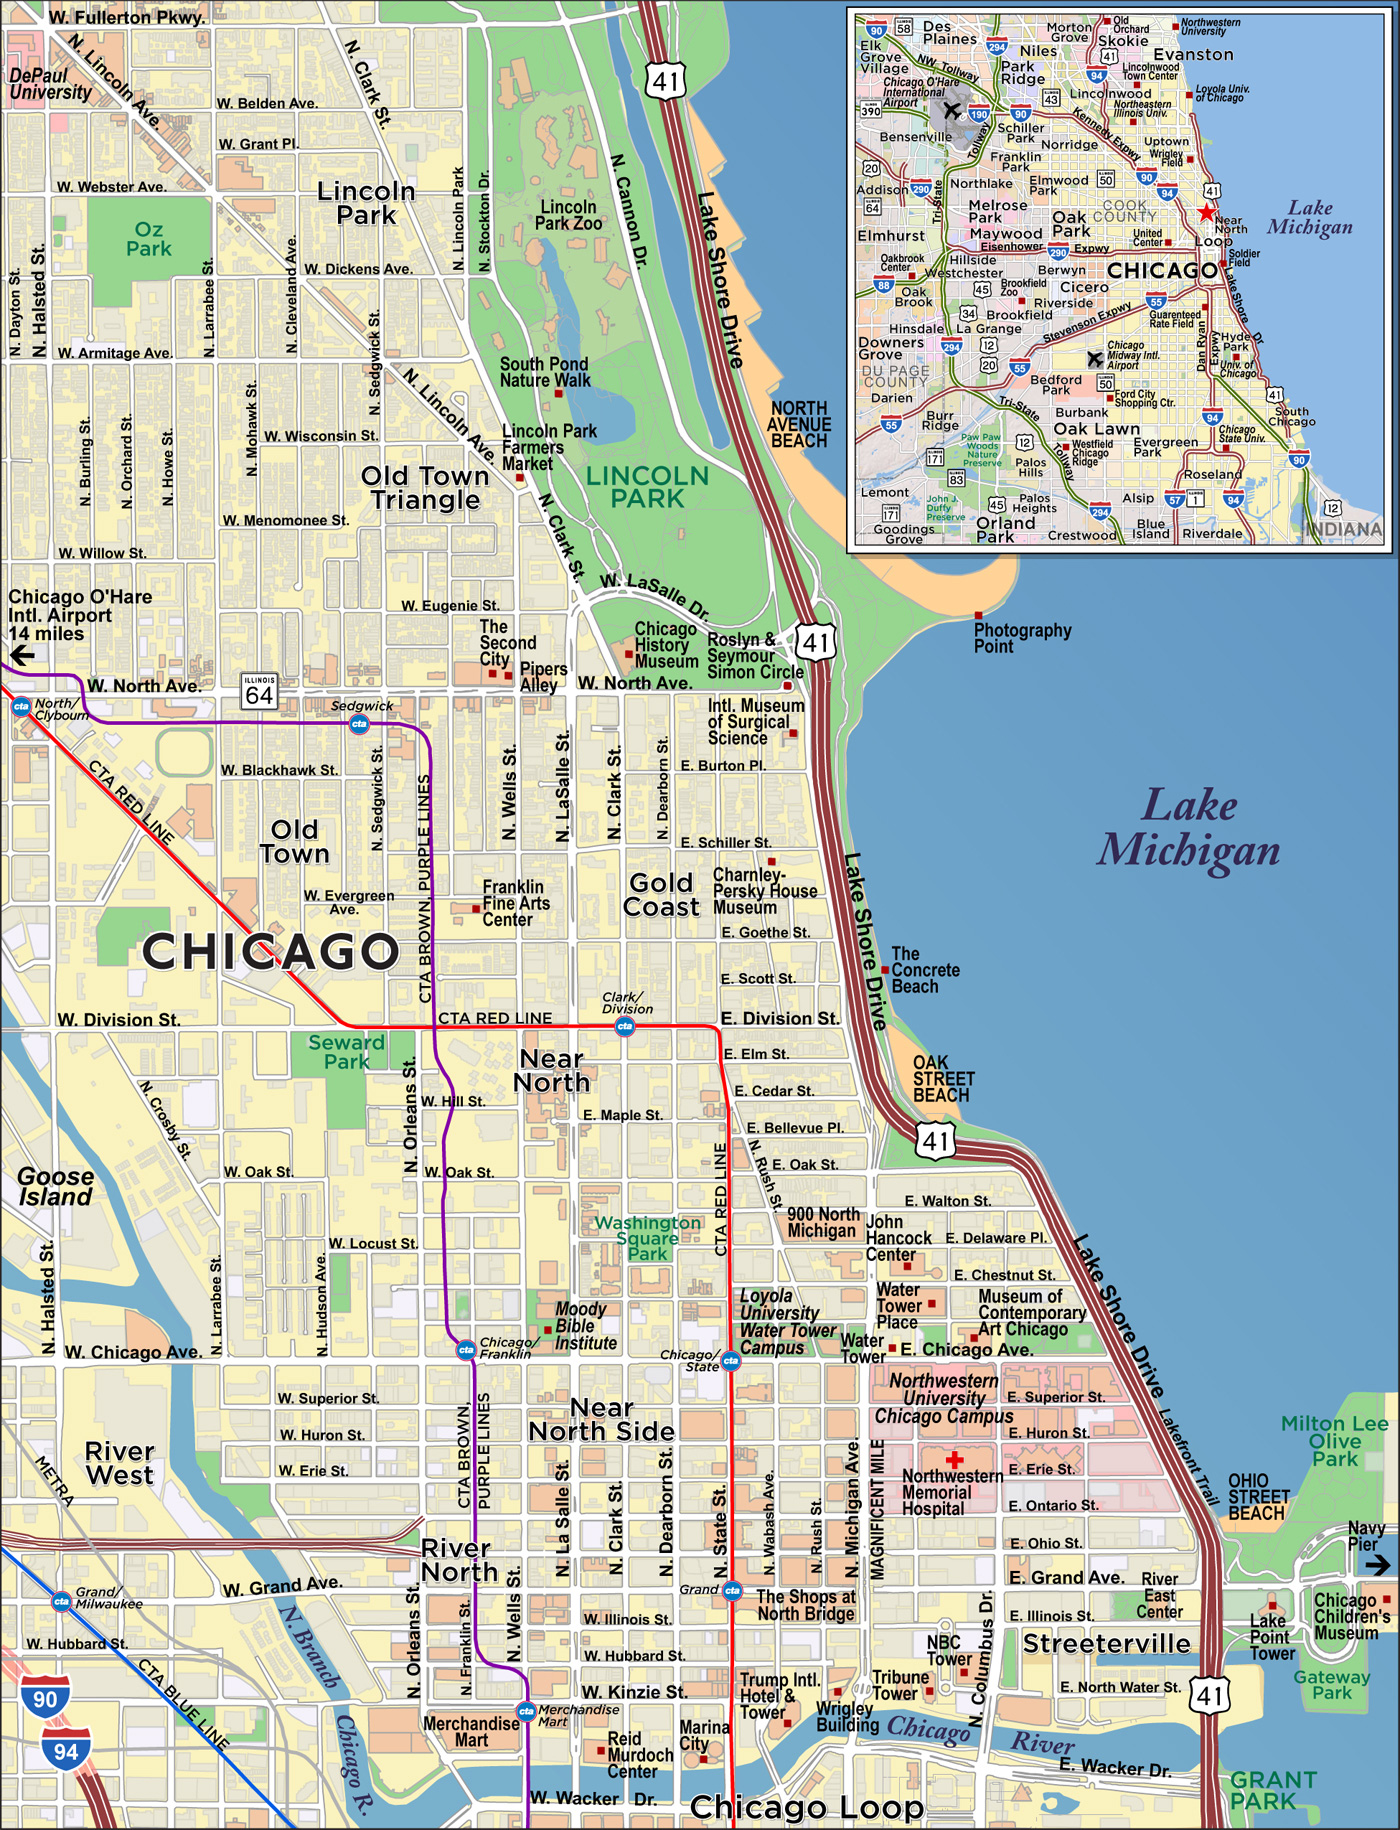 Chicago-North Side | Red Paw Technologies